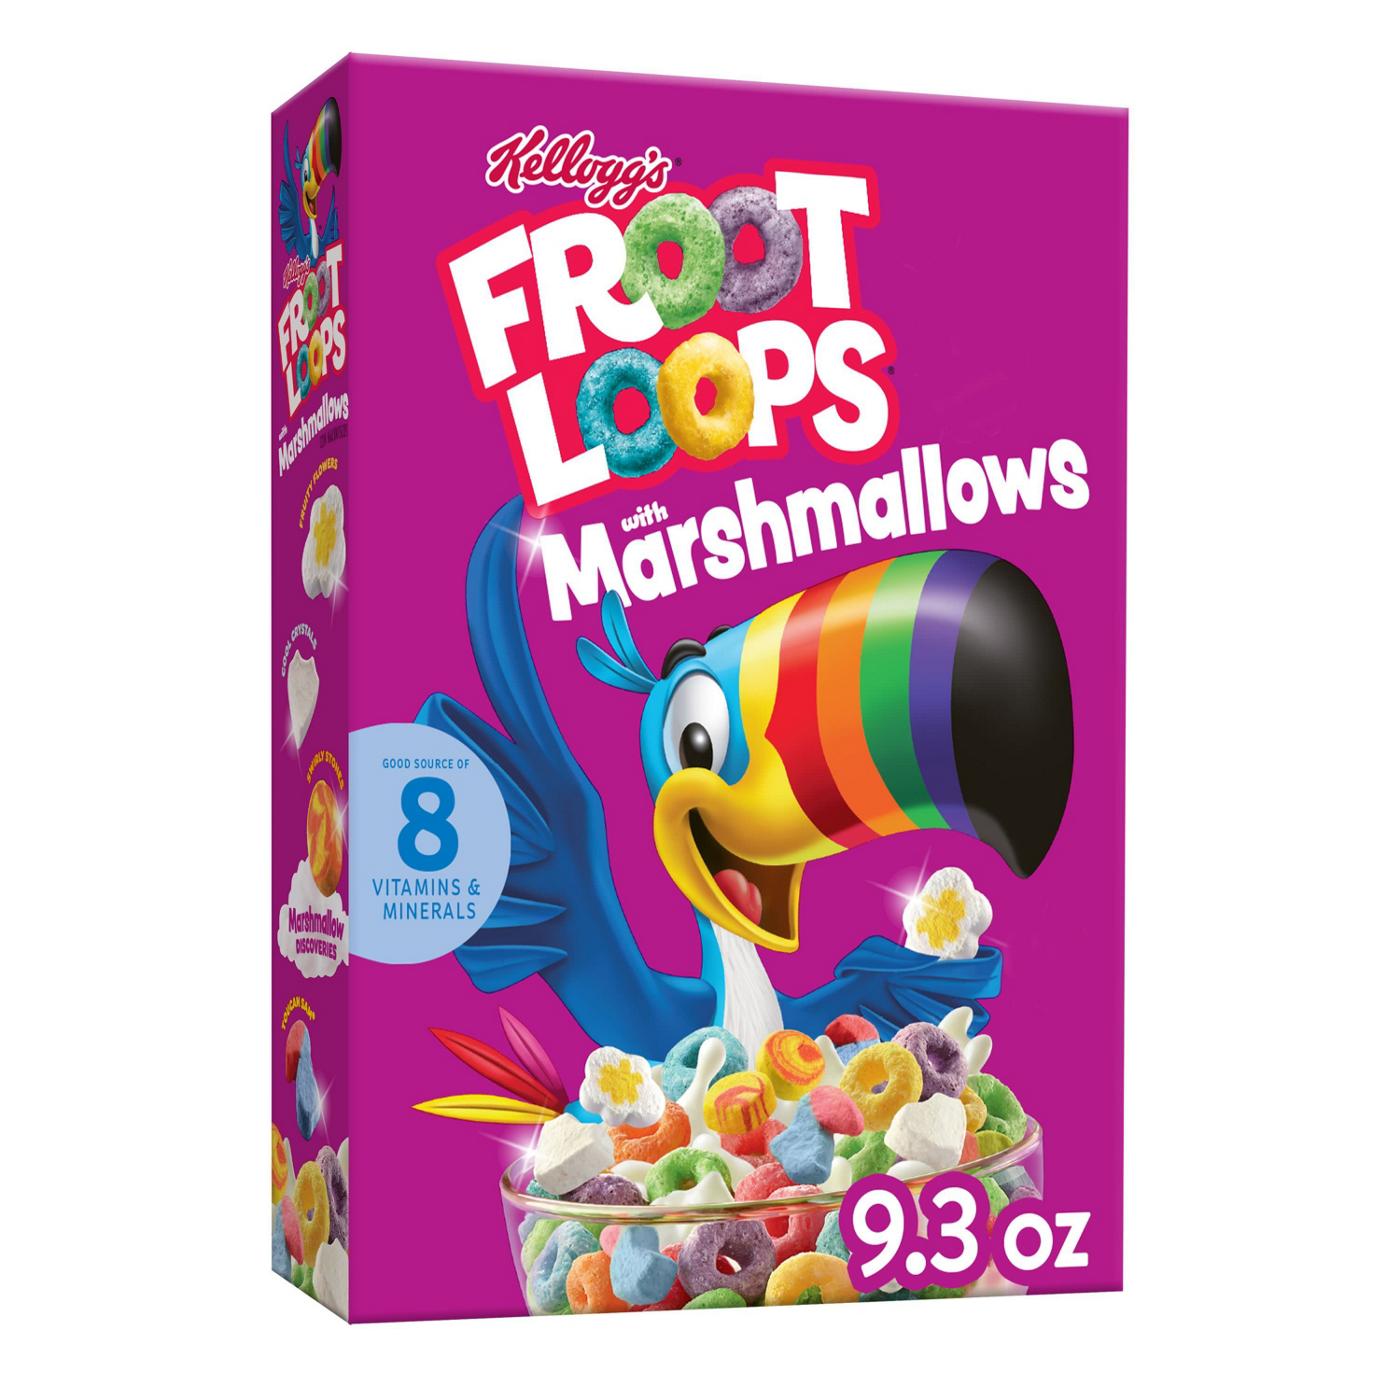 Kellogg's Froot Loops Original with Marshmallows Breakfast Cereal; image 1 of 3